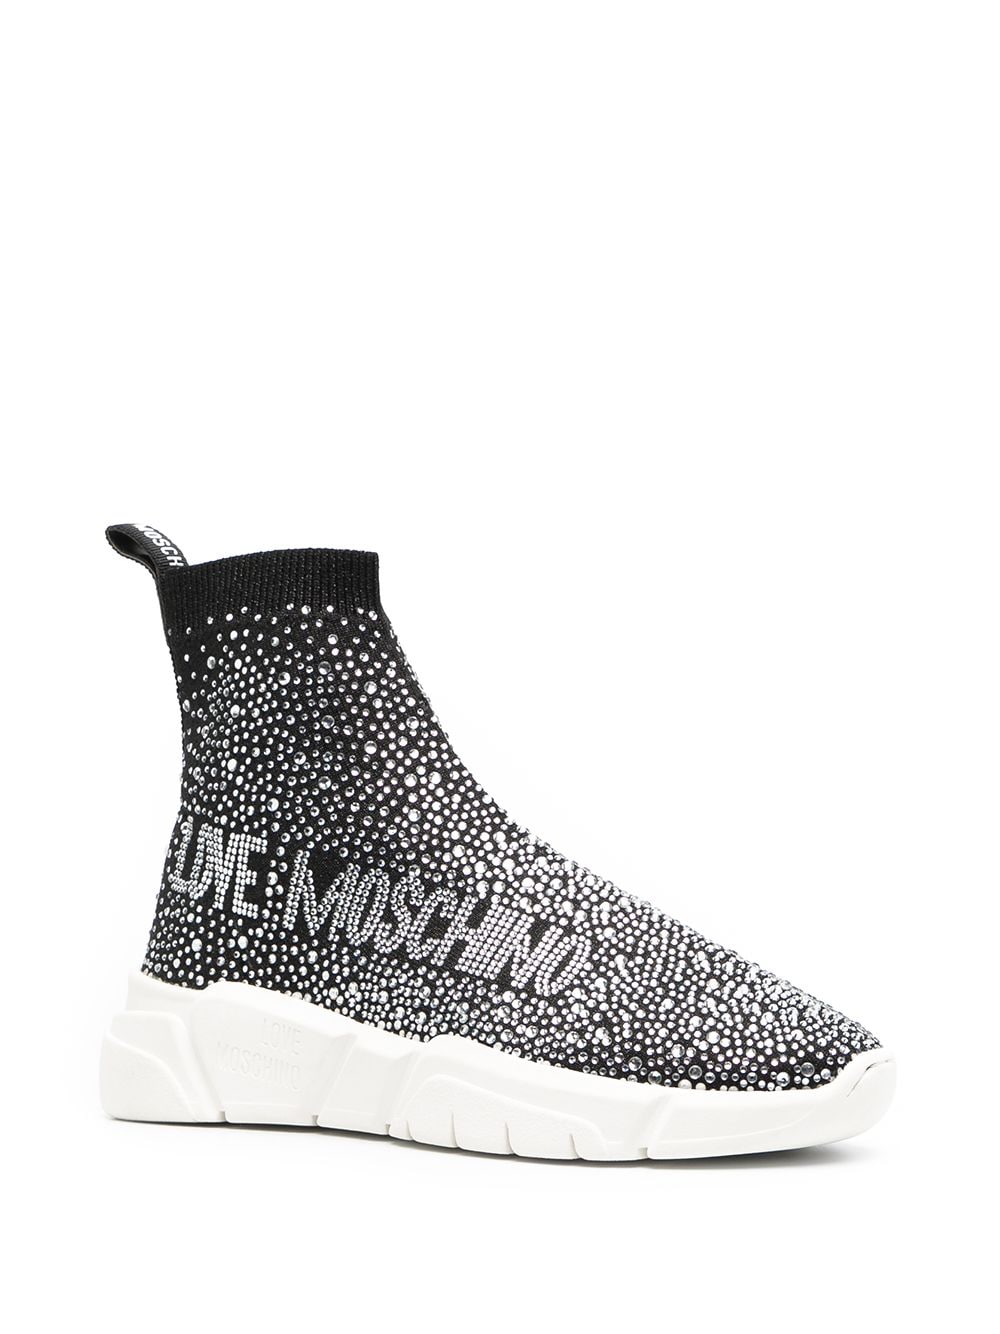 LOVE MOSCHINO CRYSTAL EMBELLISHED SLIP ON SNEAKERS